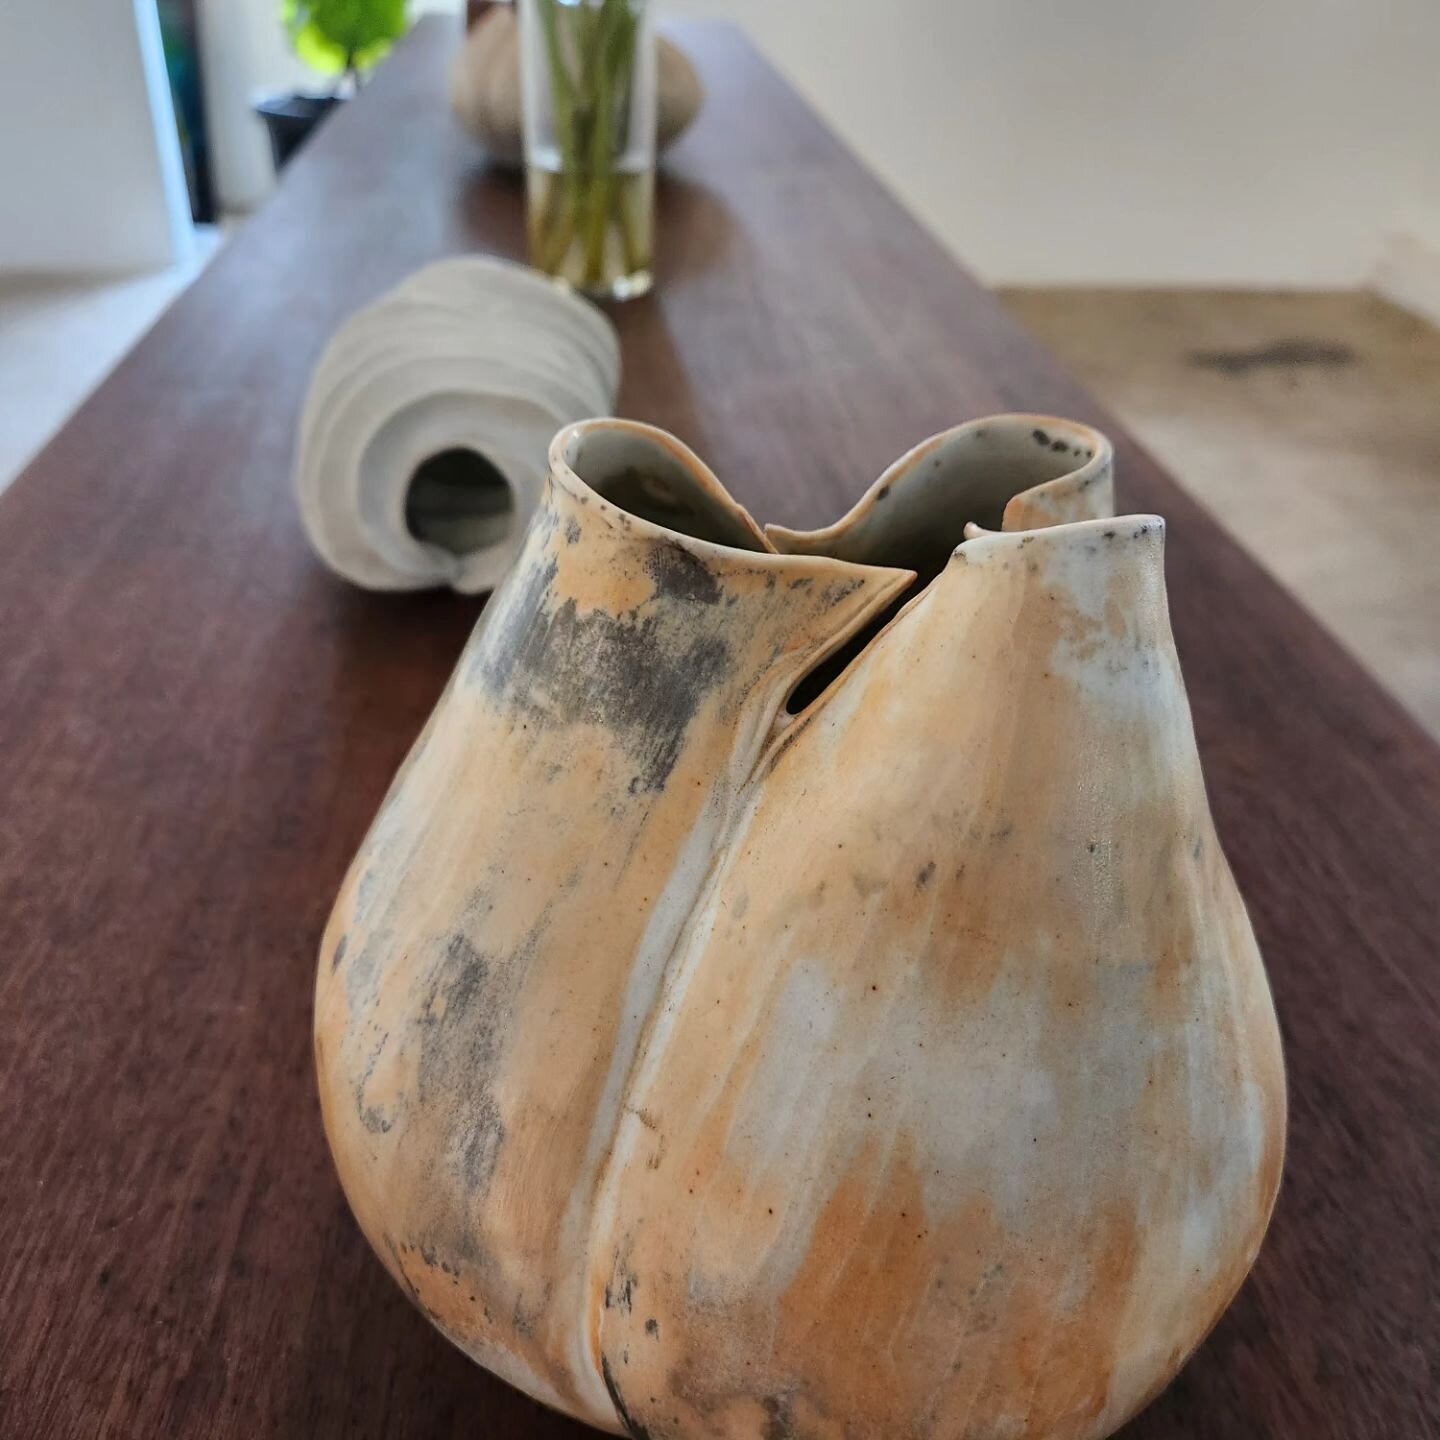 Cloud Tree is both thrilled and honored to host and curate the work of 12 celebrated
ceramicists, both local and national, in its first ever group exhibition of ceramic art. From the
functional to the decorative, both sculptural and conceptual, Fired